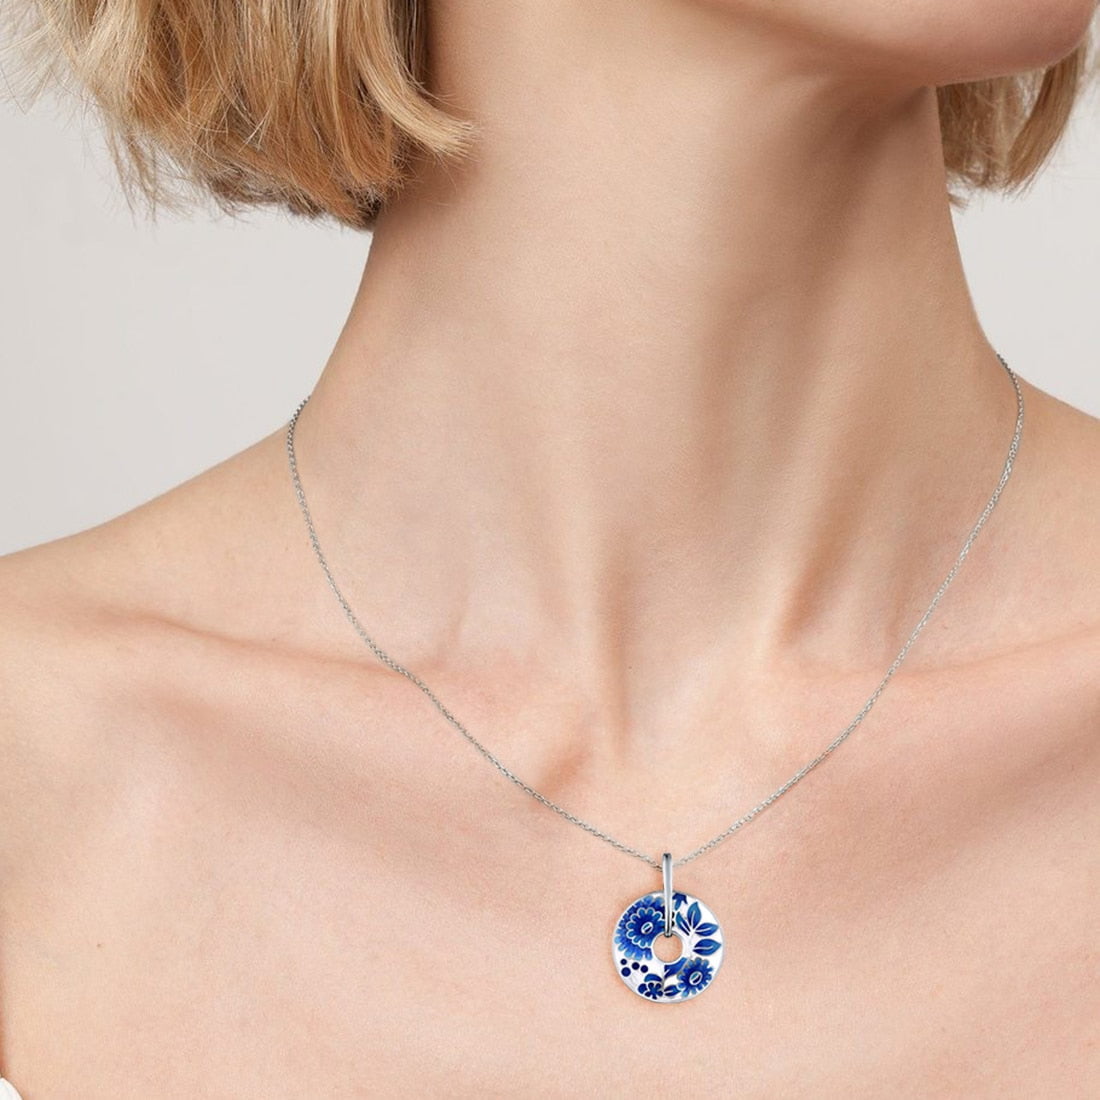 Stavoren Pendant (Necklace not Included) - ANN VOYAGE